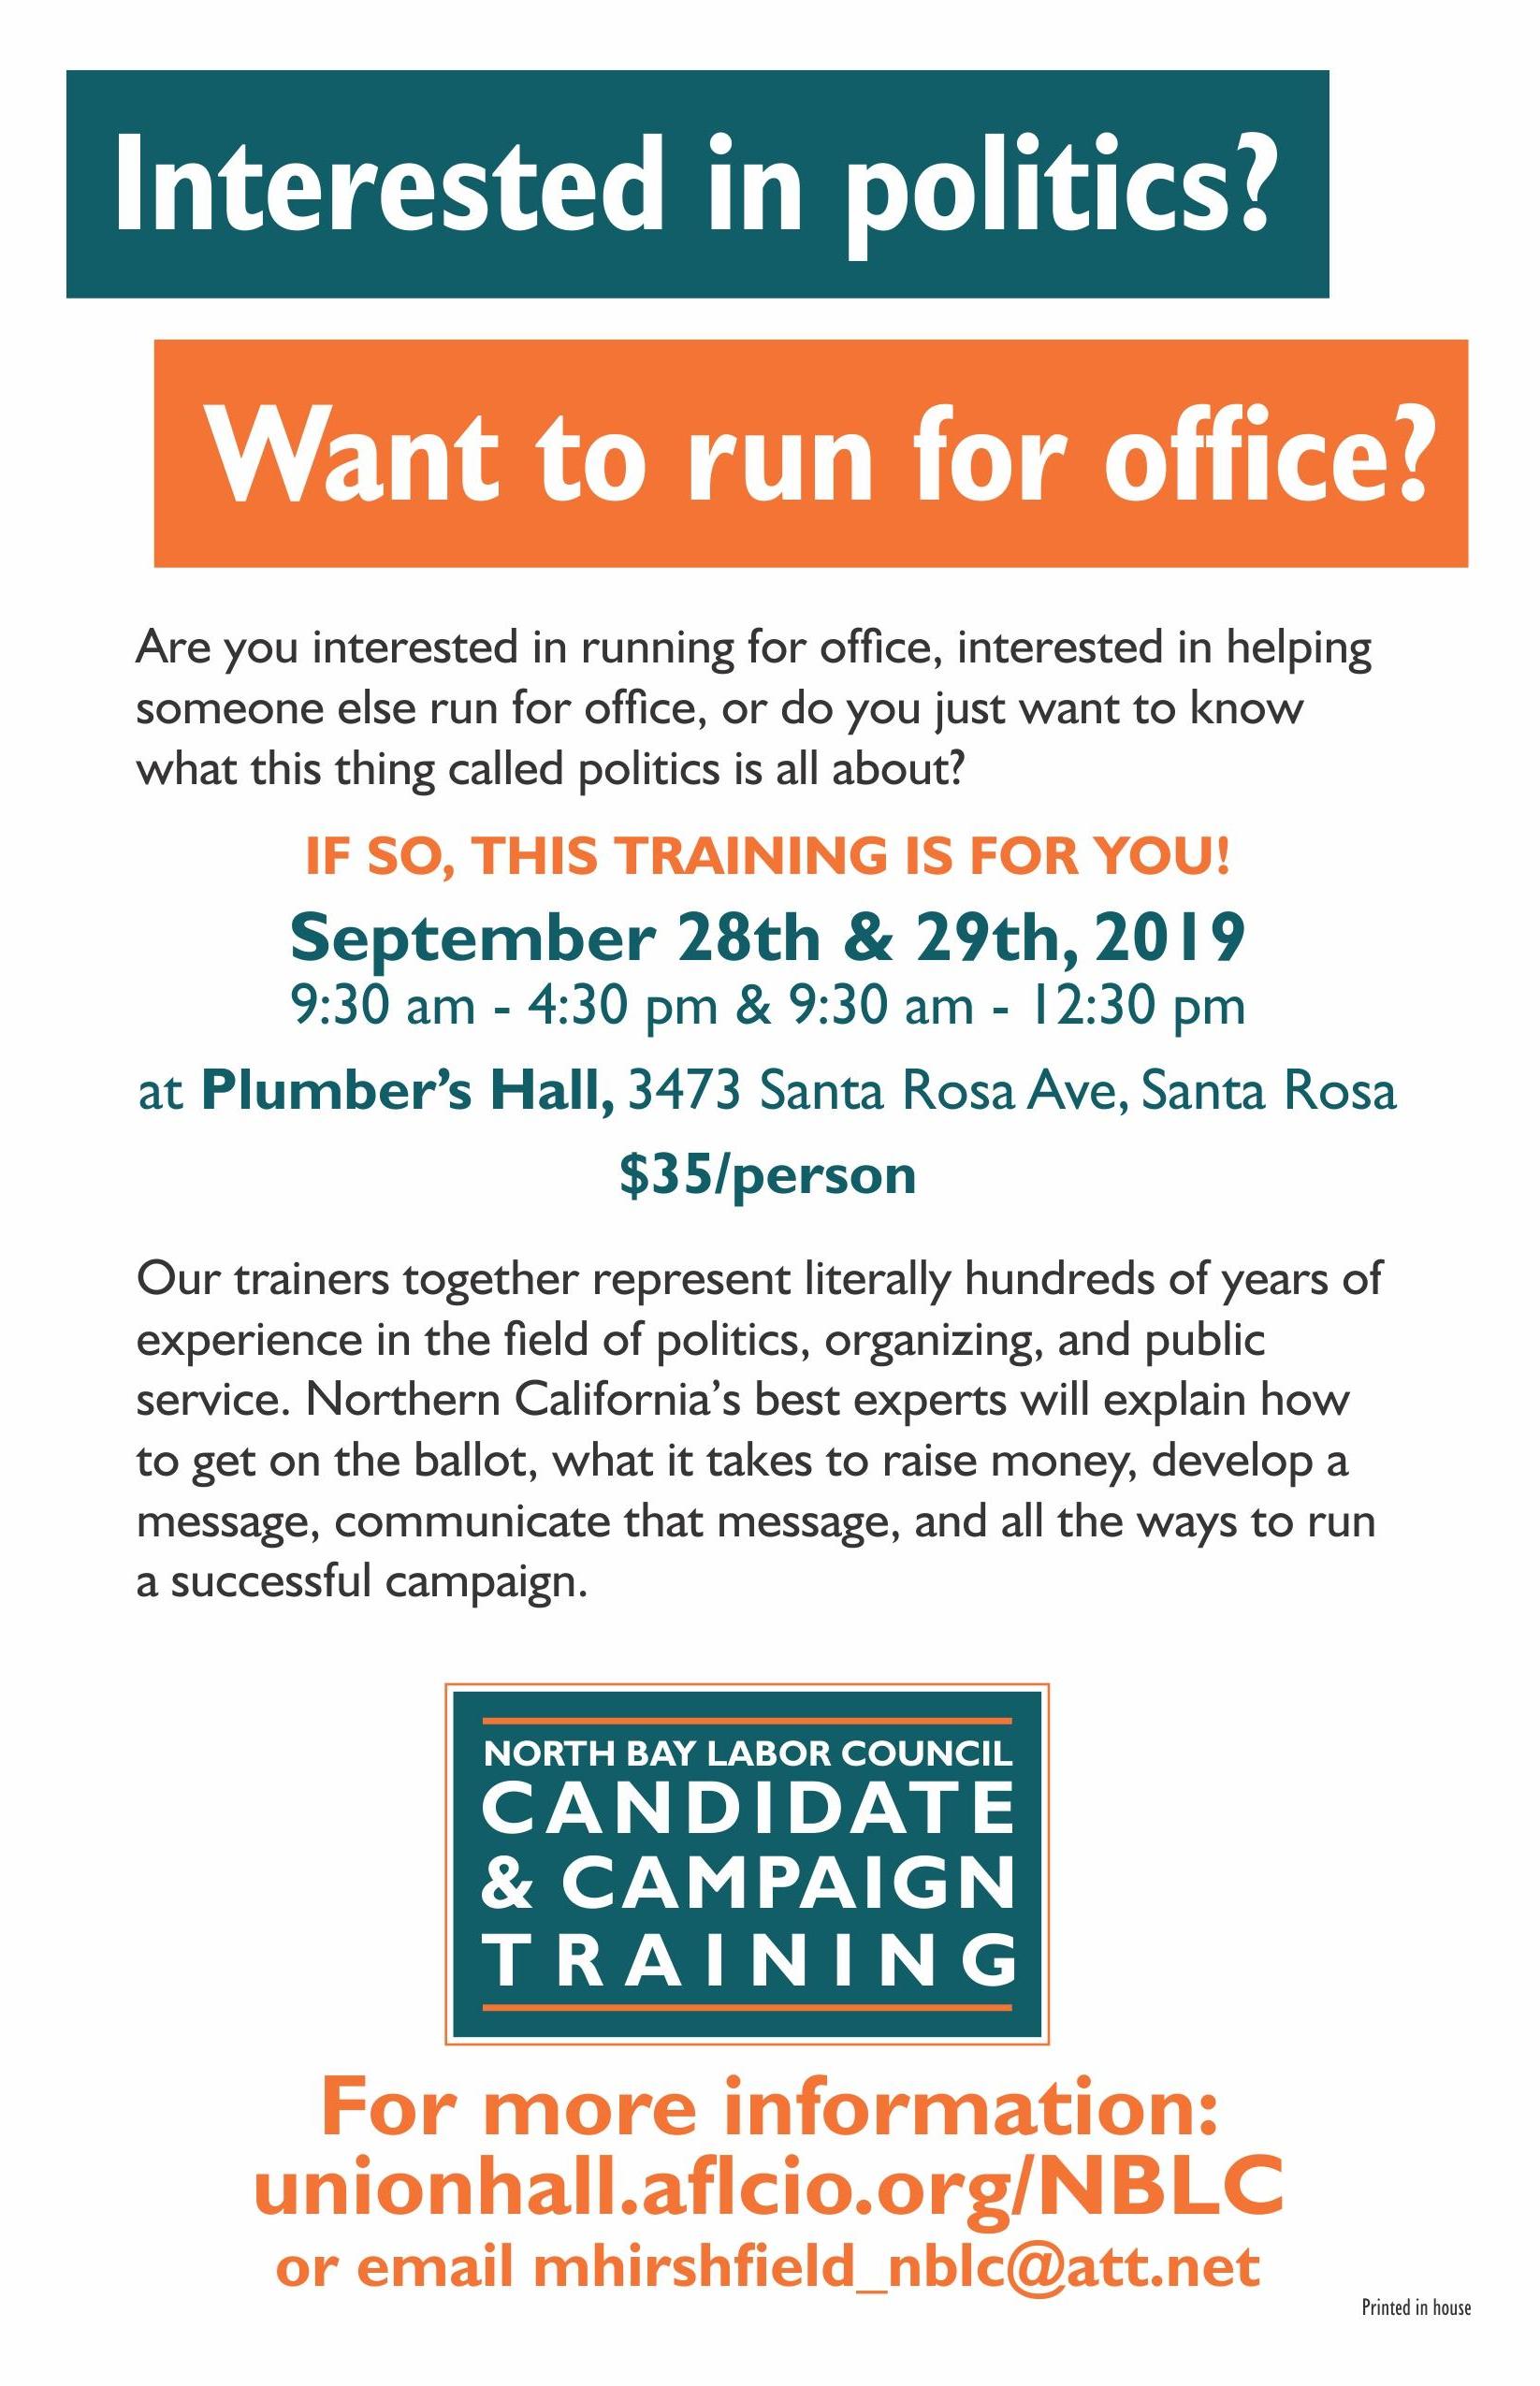 NBLC  Campaign and Candidate Training, 9/28-29